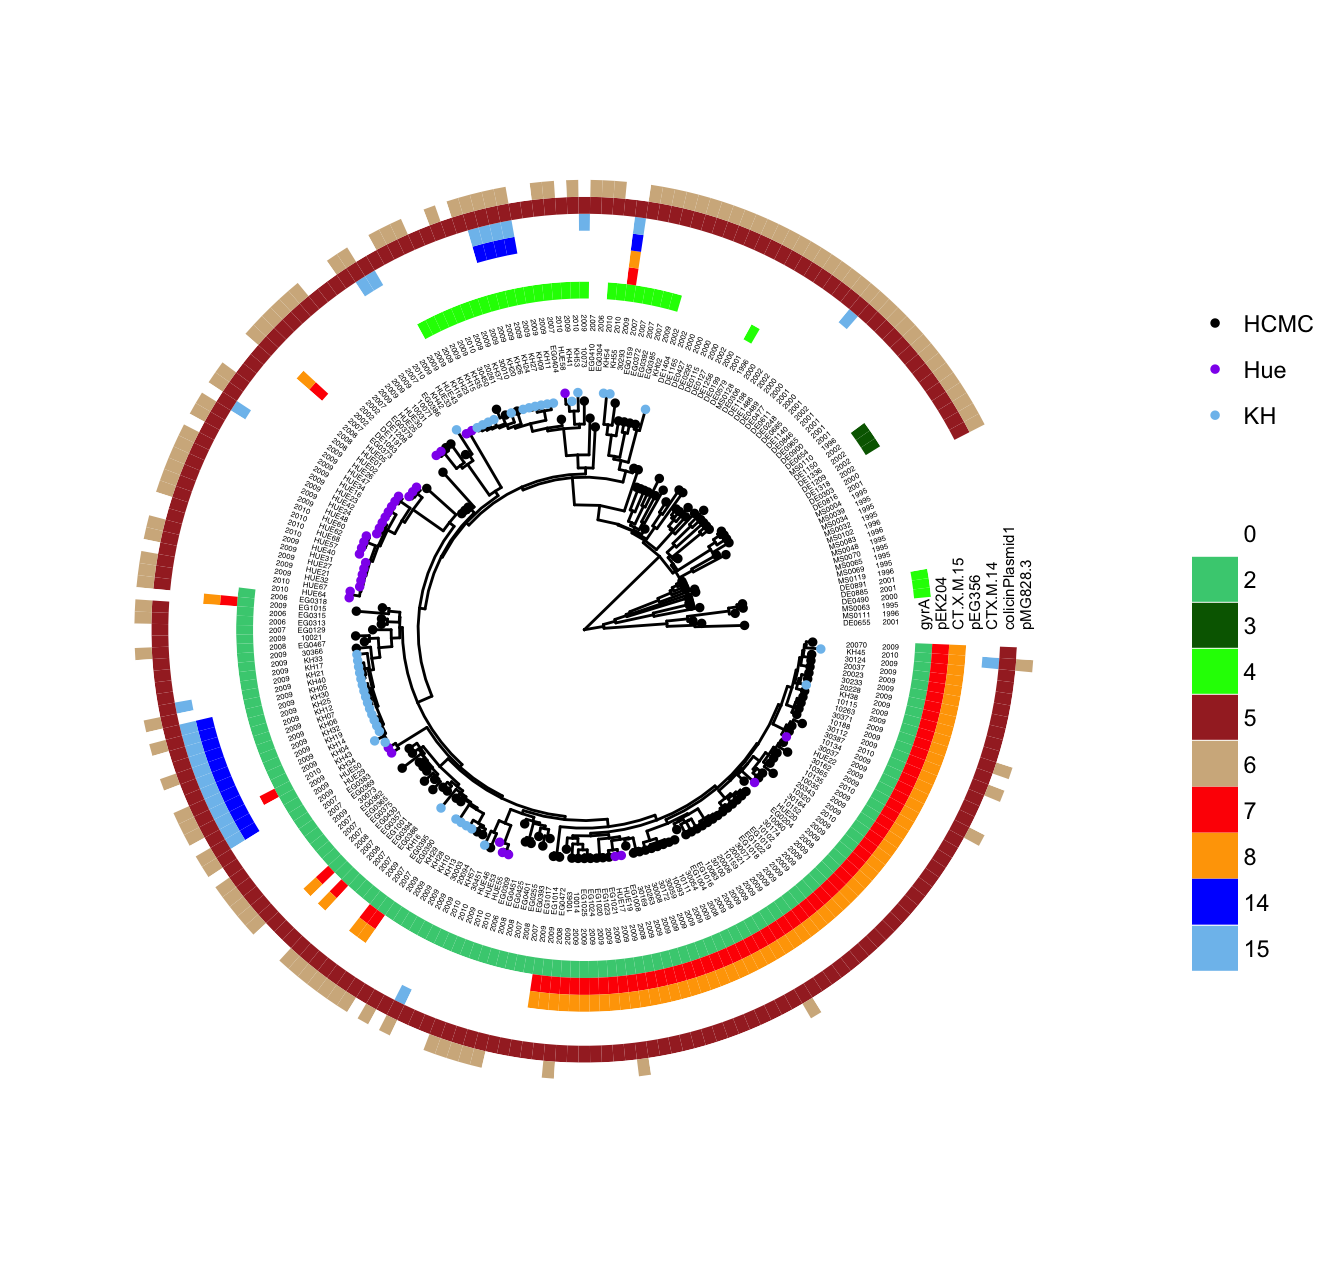 Example of annotating a tree with diverse associated data. Circle symbols are colored by strain sampling location. Taxa names and sampling years are aligned to the tips. Curated gene information were visualized as a heatmap (colored boxed on the outer circles).